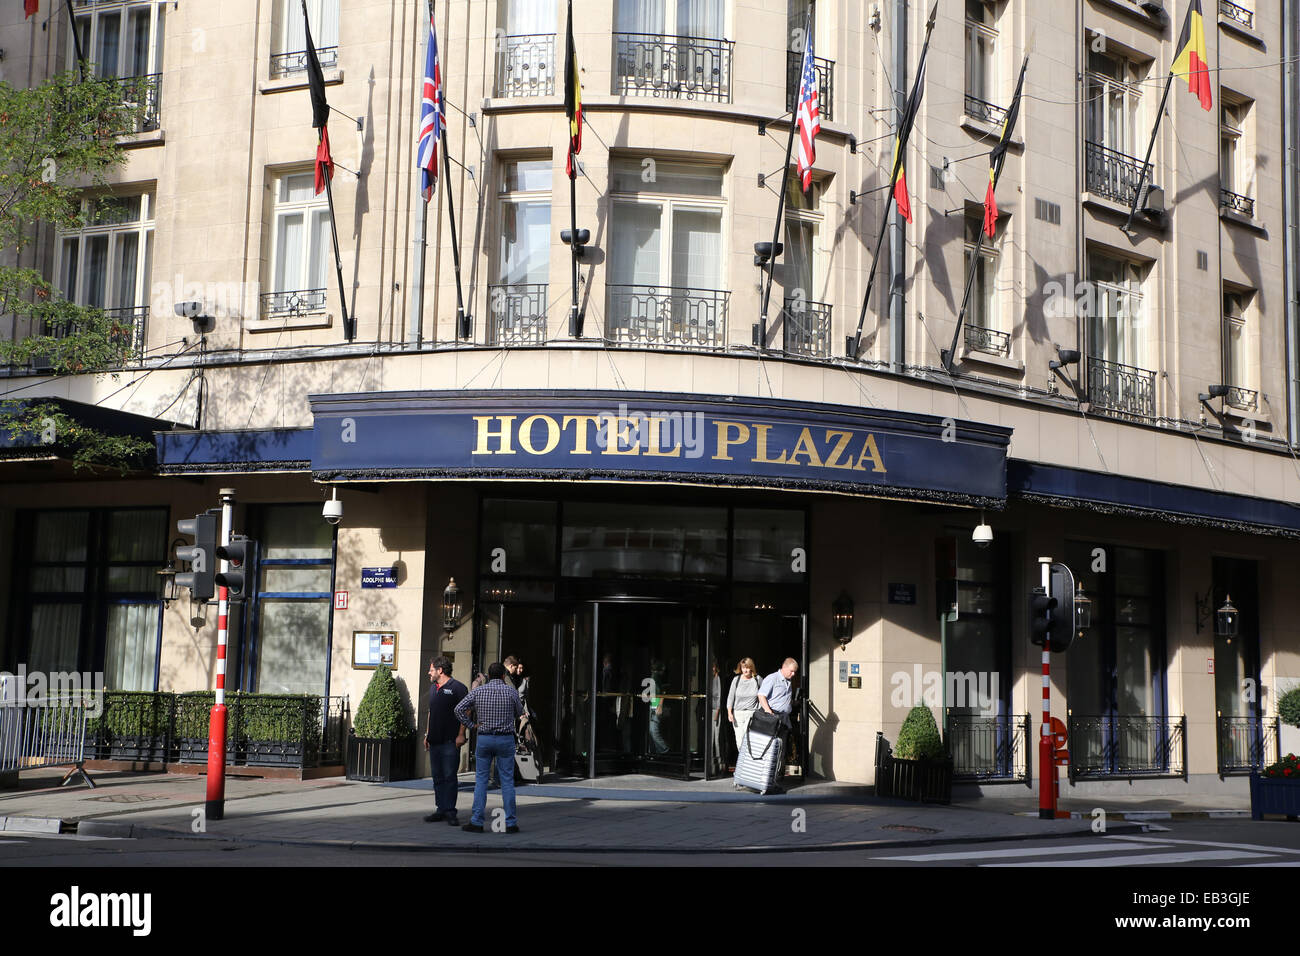 brussels hotel plaza Stock Photo